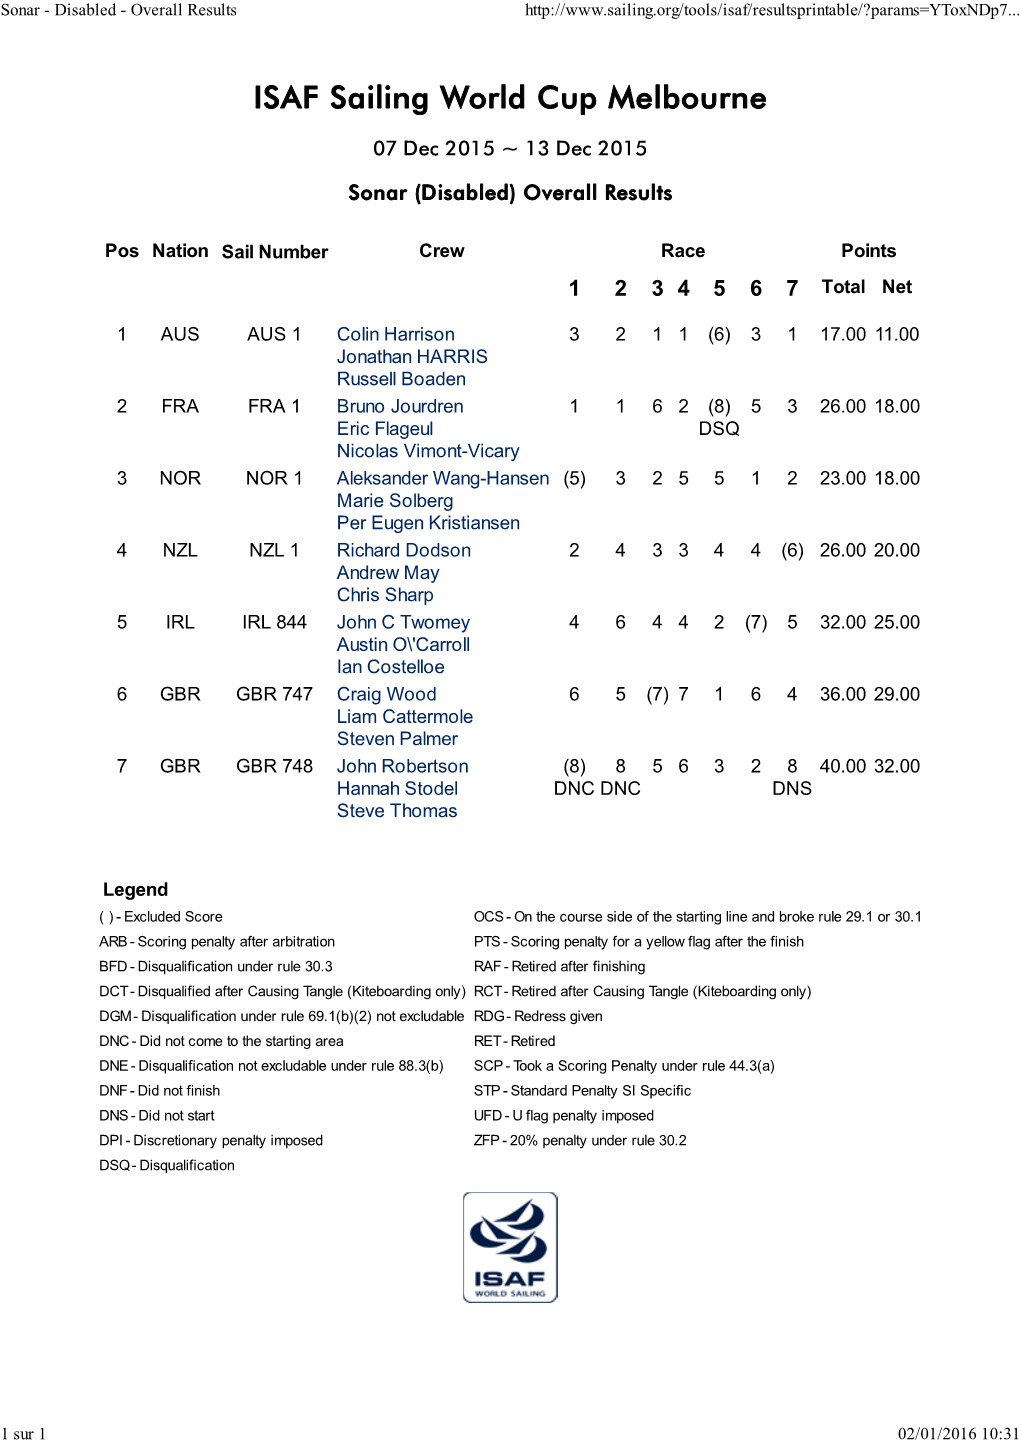 SWC Melbourne Sonar Overall Results D